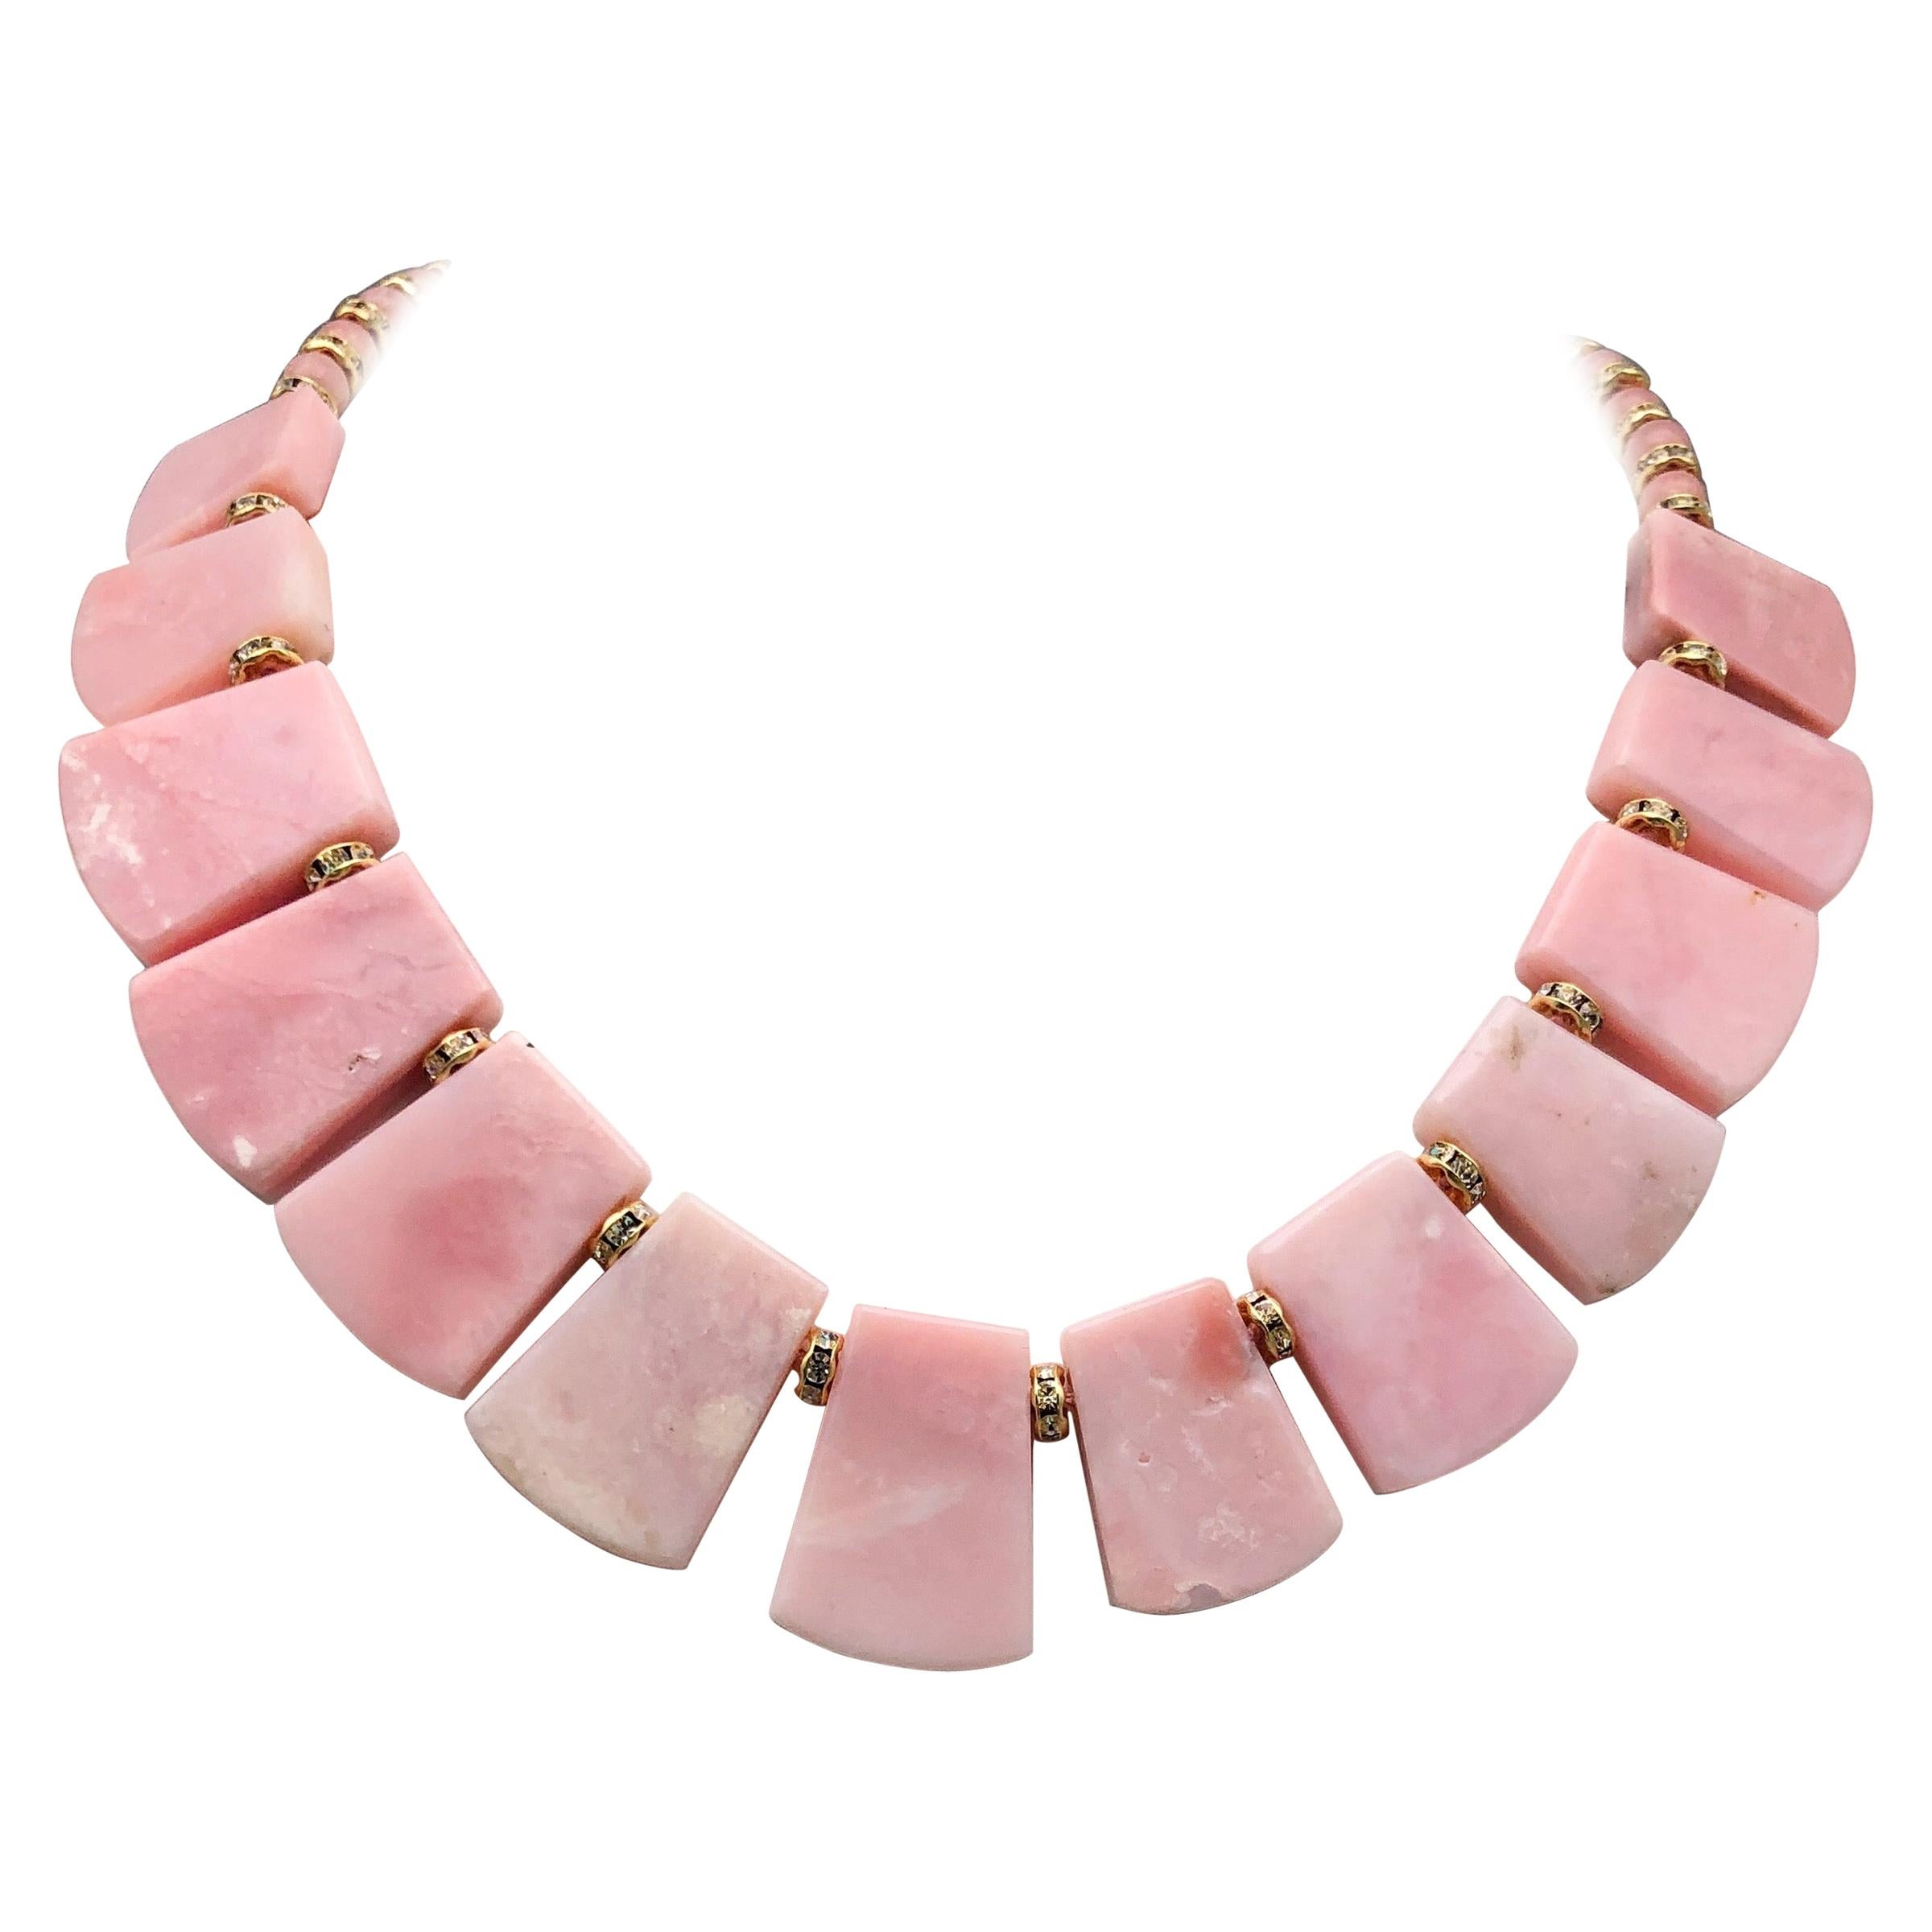 A.Jeschel Luxury and Pretty in a Pink Opal Necklace.